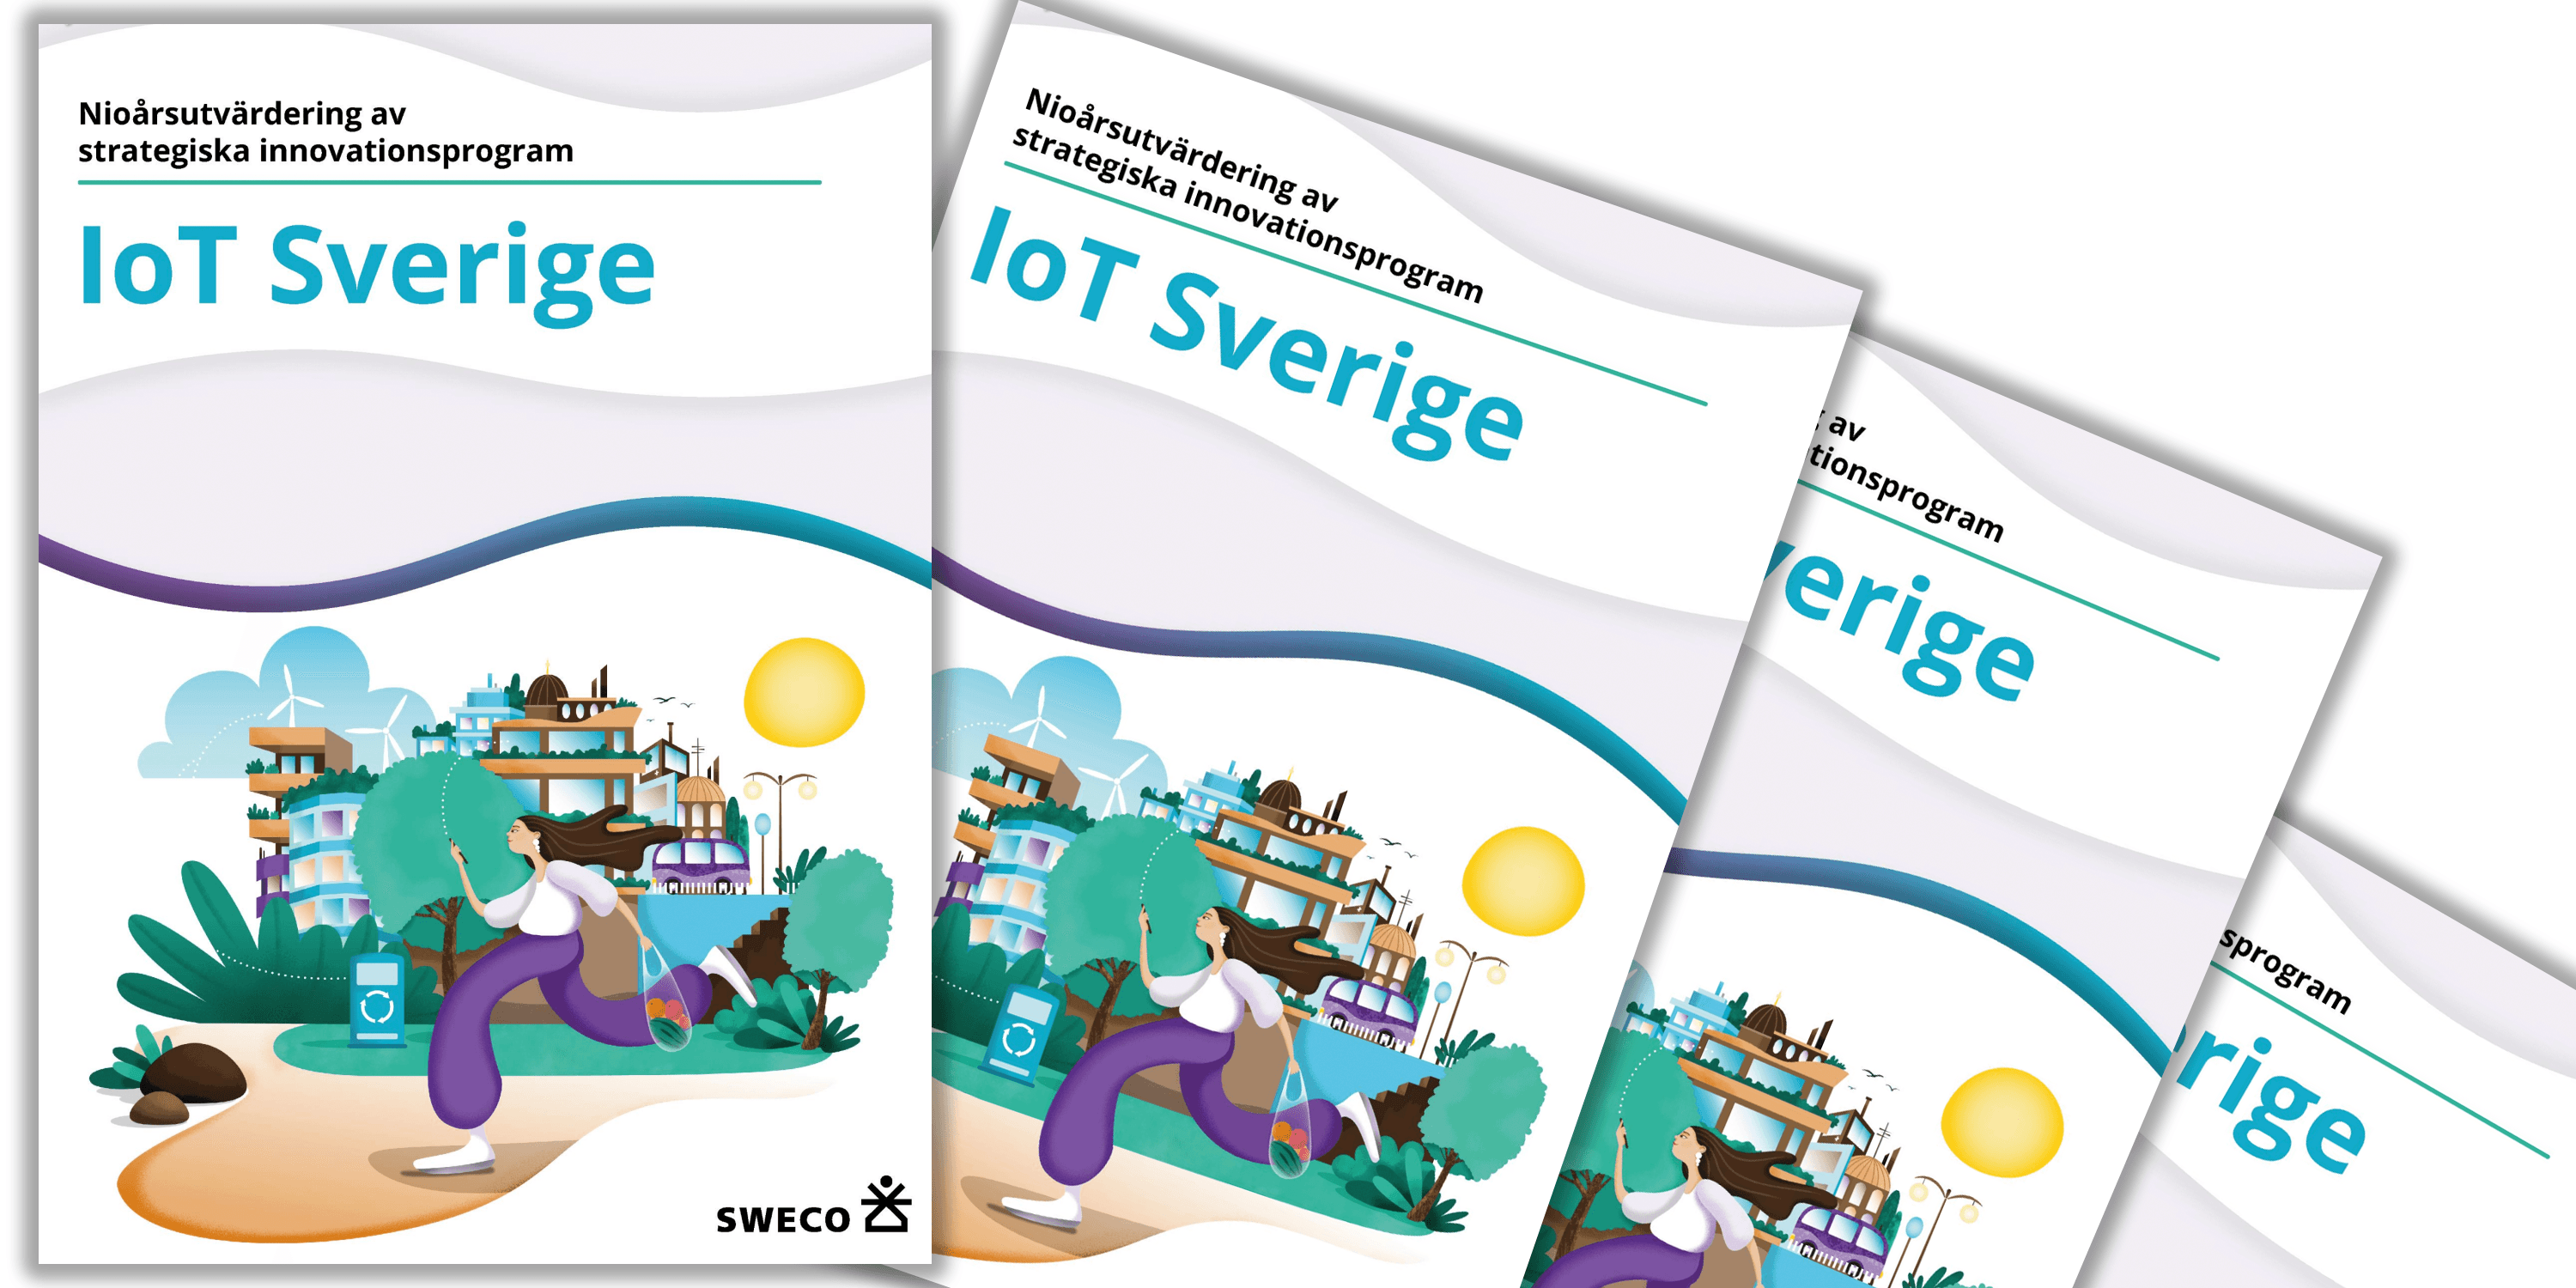 “IoT Sweden is a well-functioning programme”